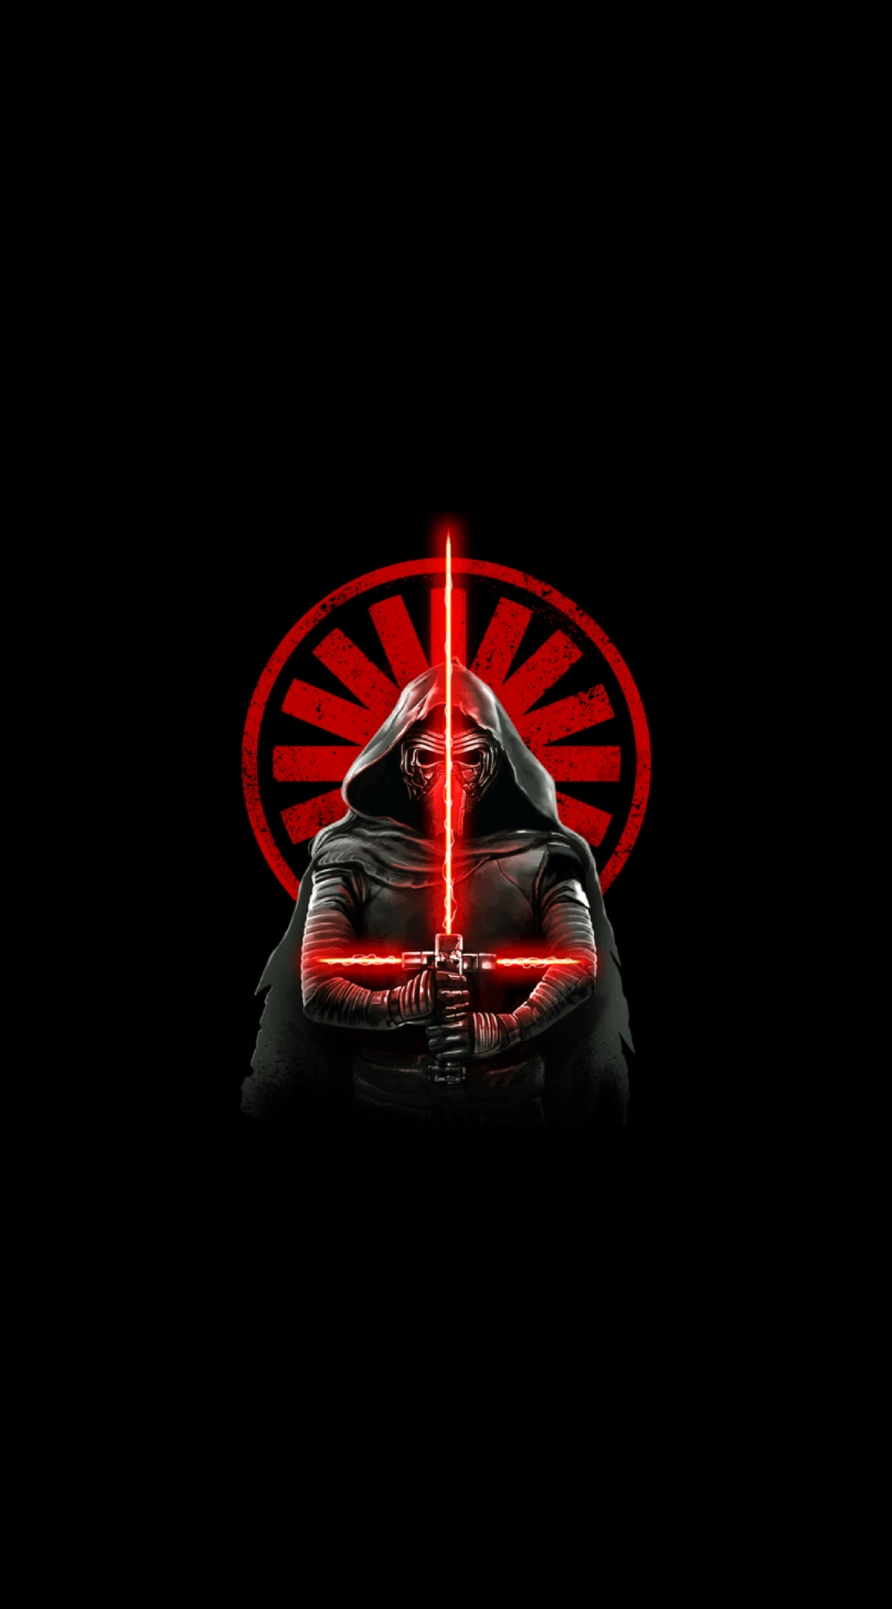 Top Kylo Ren Mask Wallpaper Download Wallpapers Book Your 1 Source For Free Download Hd 4k High Quality Wallpapers